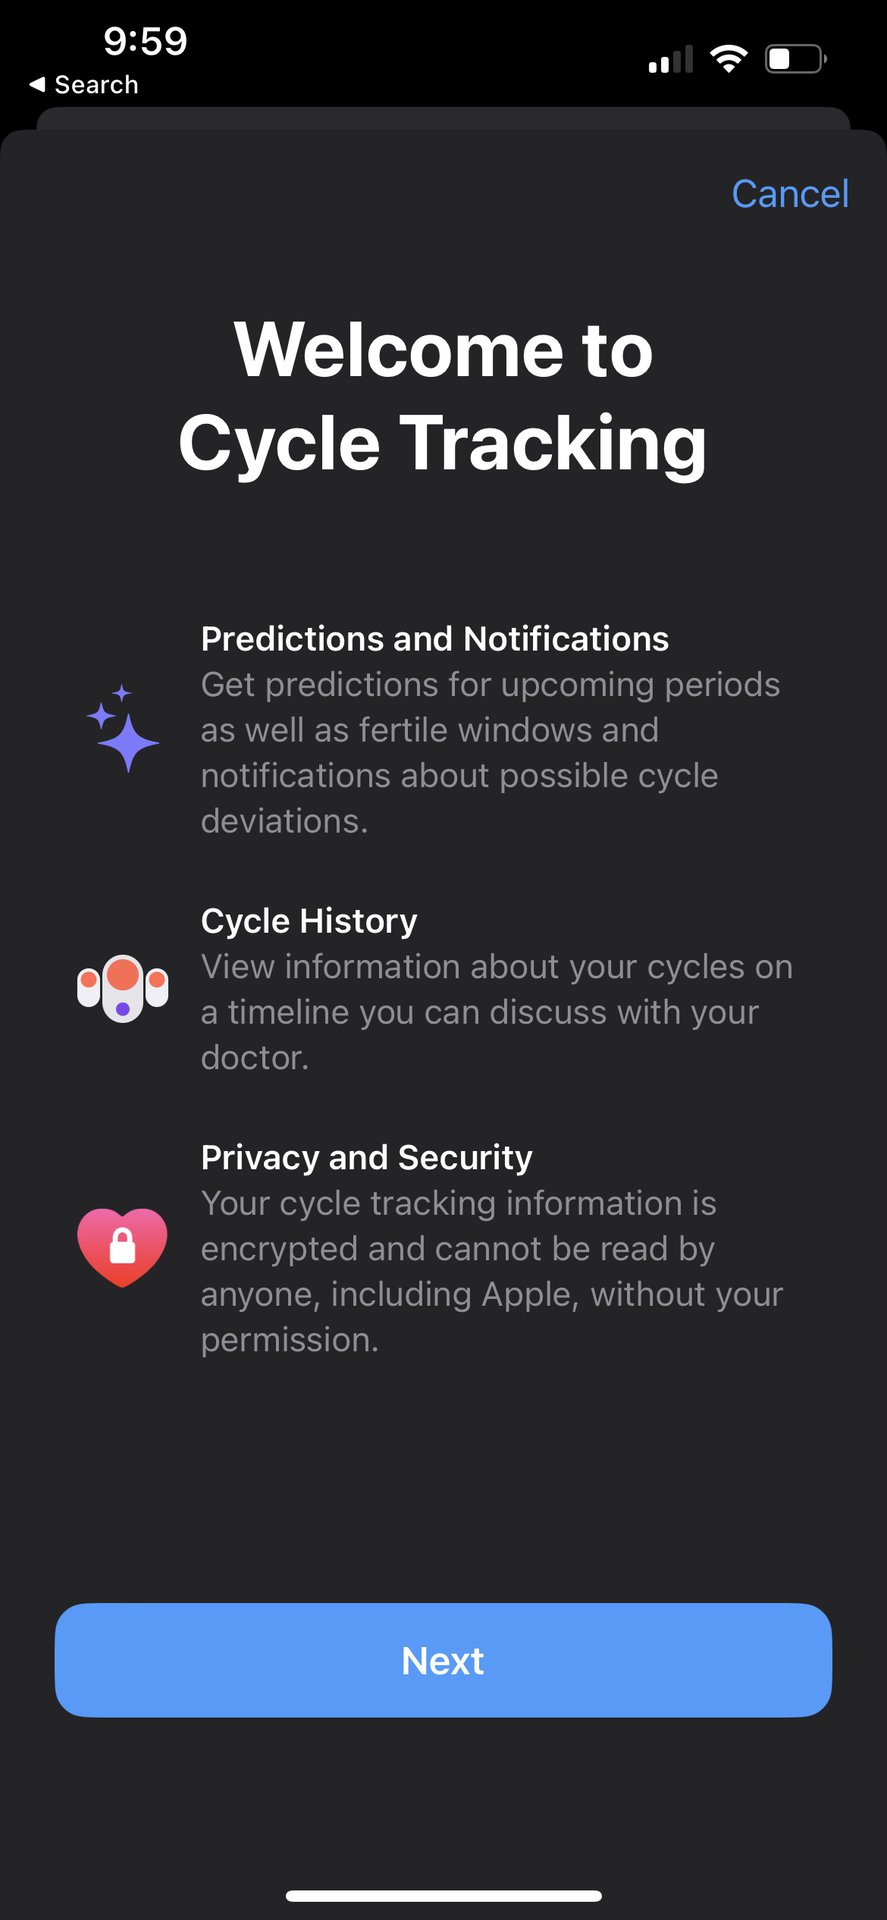 Apple Watch Welcome Cycle Tracking